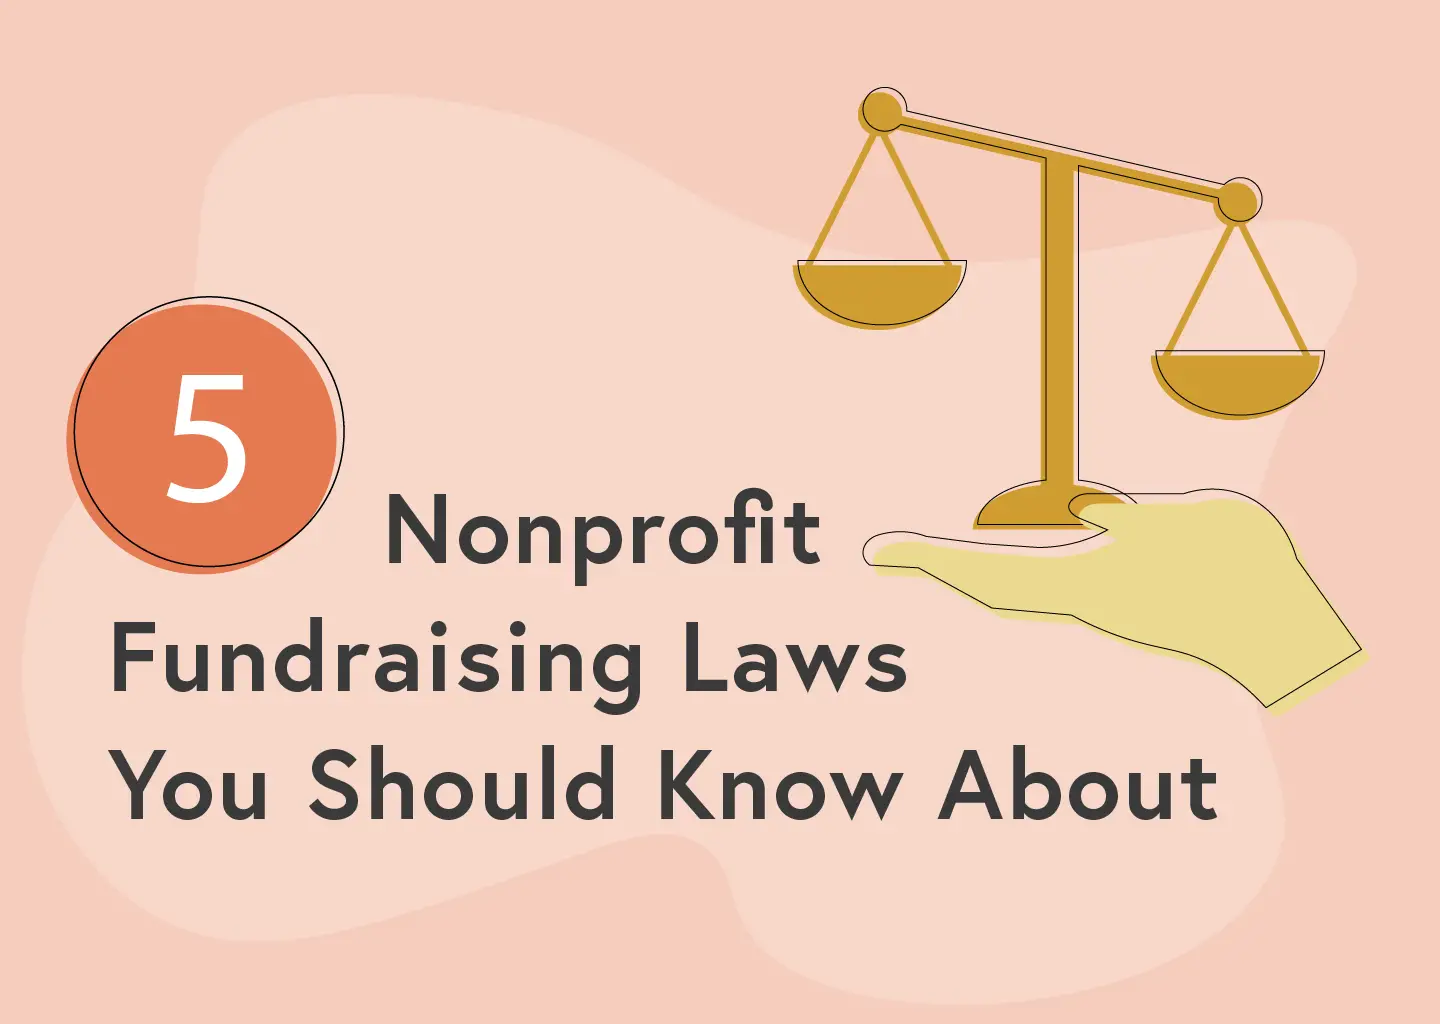 5 Nonprofit Fundraising Laws You Should Know About